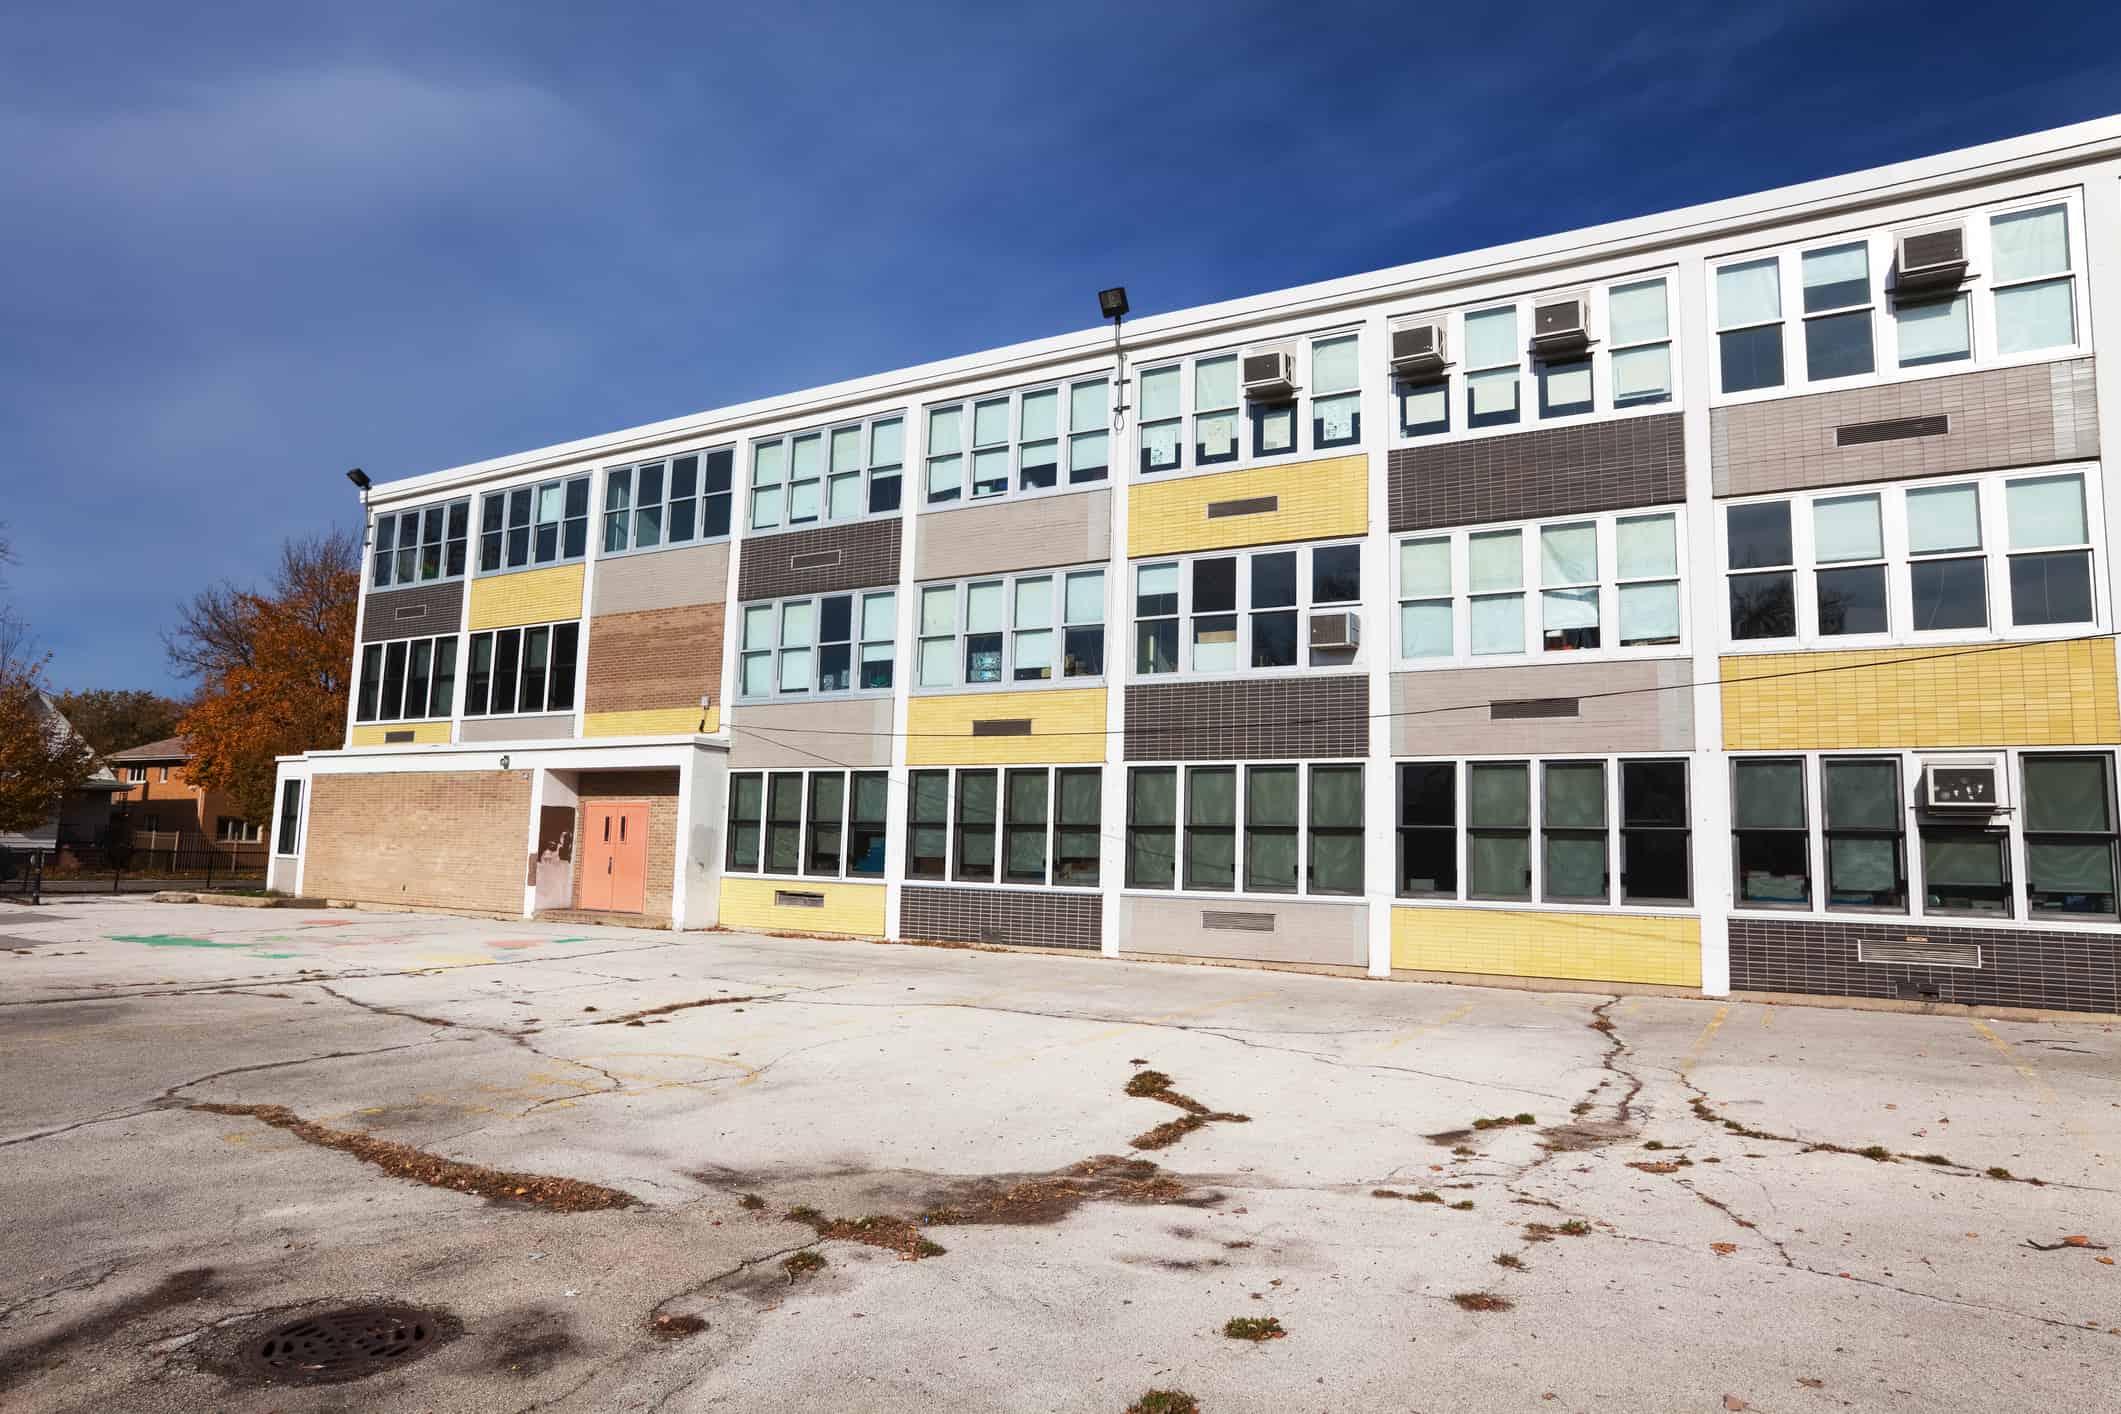 Woods Math and Science Academy in West Englewood, Chicago